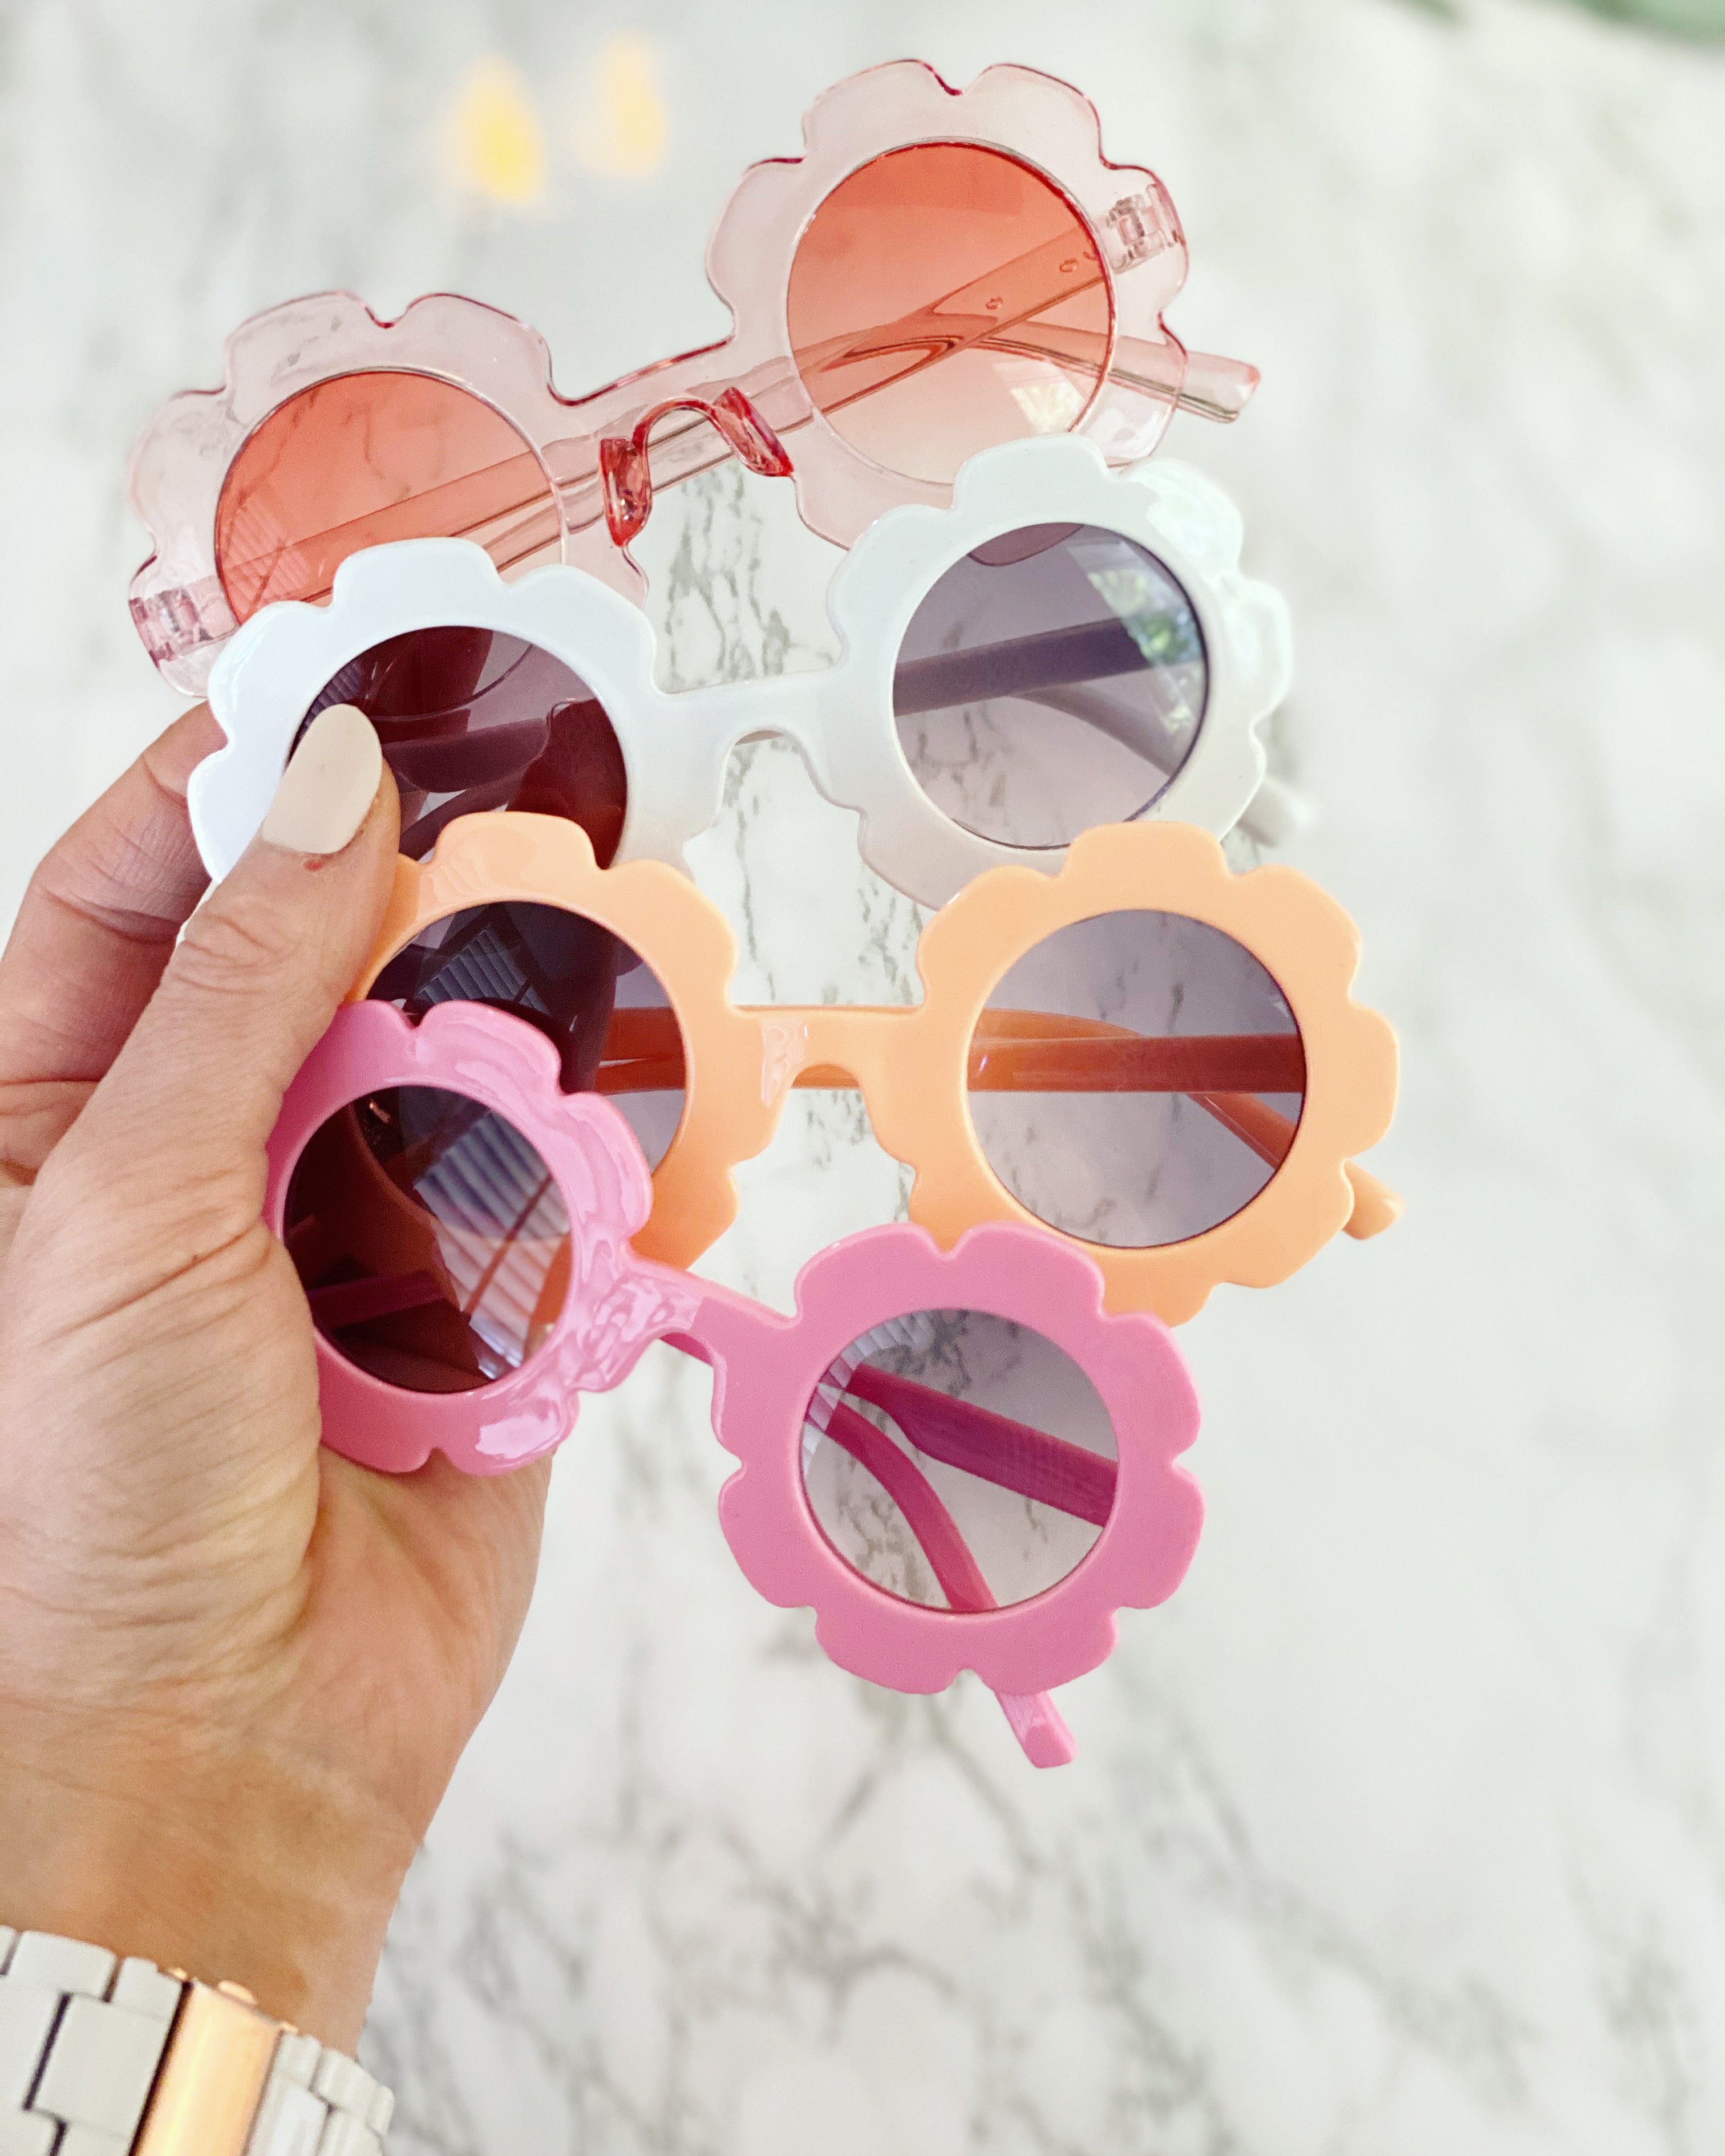 Buy Pelo Kids Sunglasses Cute Round Sunglasses Flower Shaped Sunglasses for  Boys Girls Party Accessories 25 Gram Pack of 1 (Pink) Online at Low Prices  in India - Amazon.in